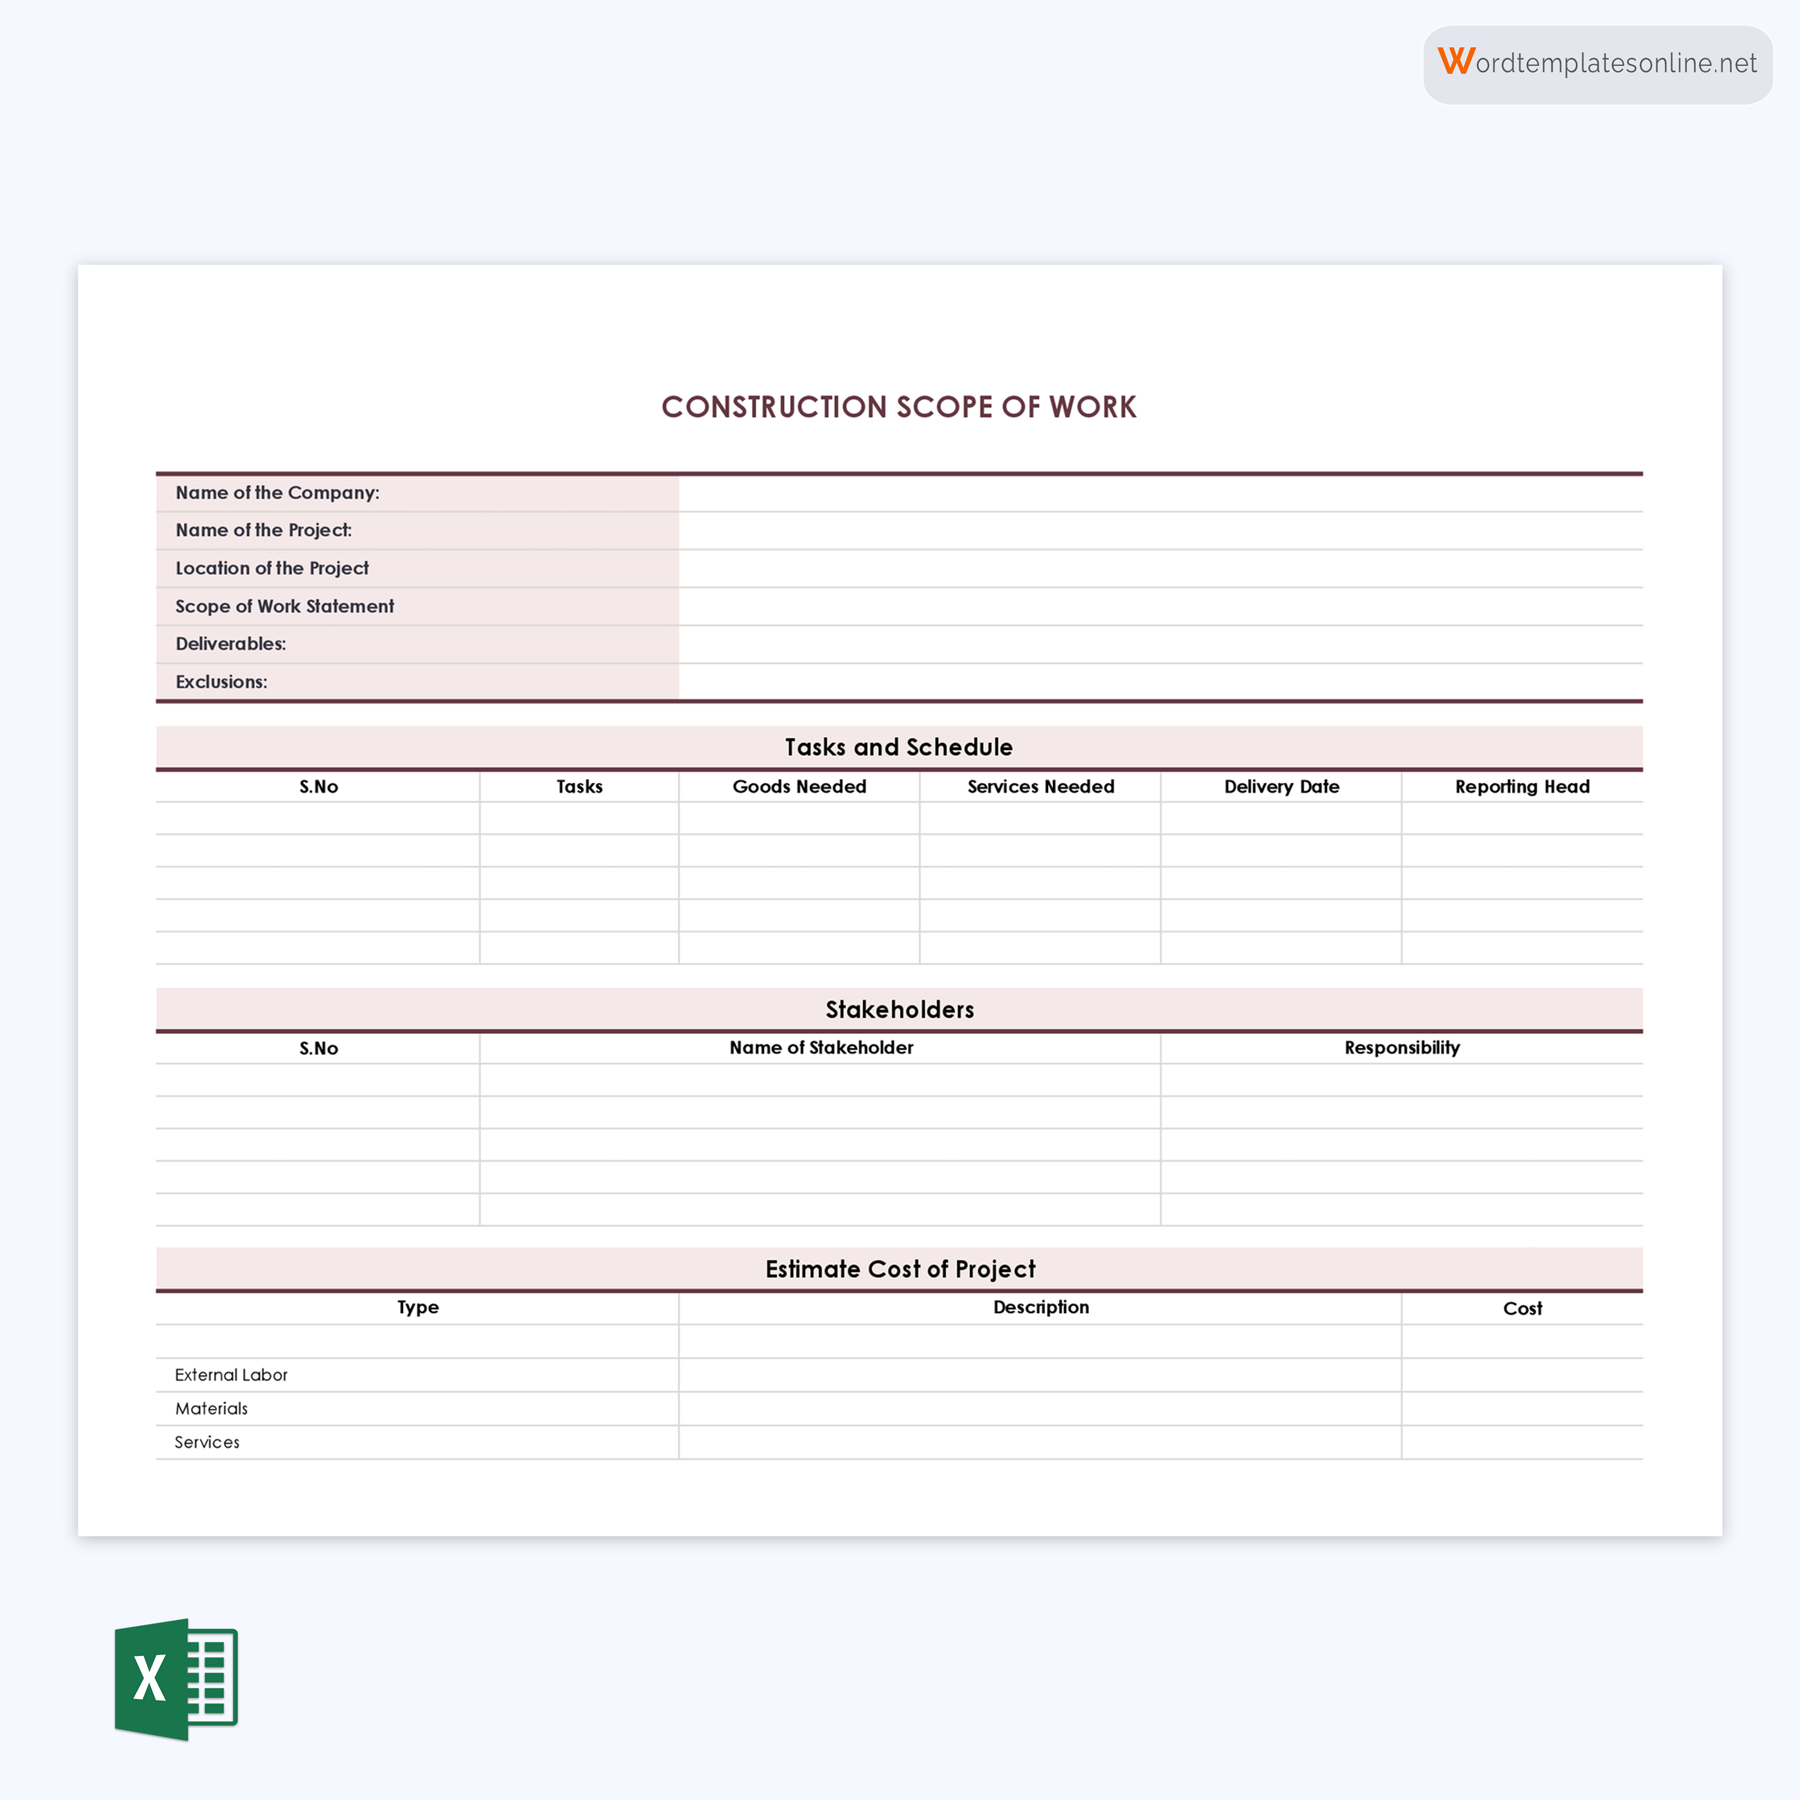 Editable Construction Scope of Work Template in Excel